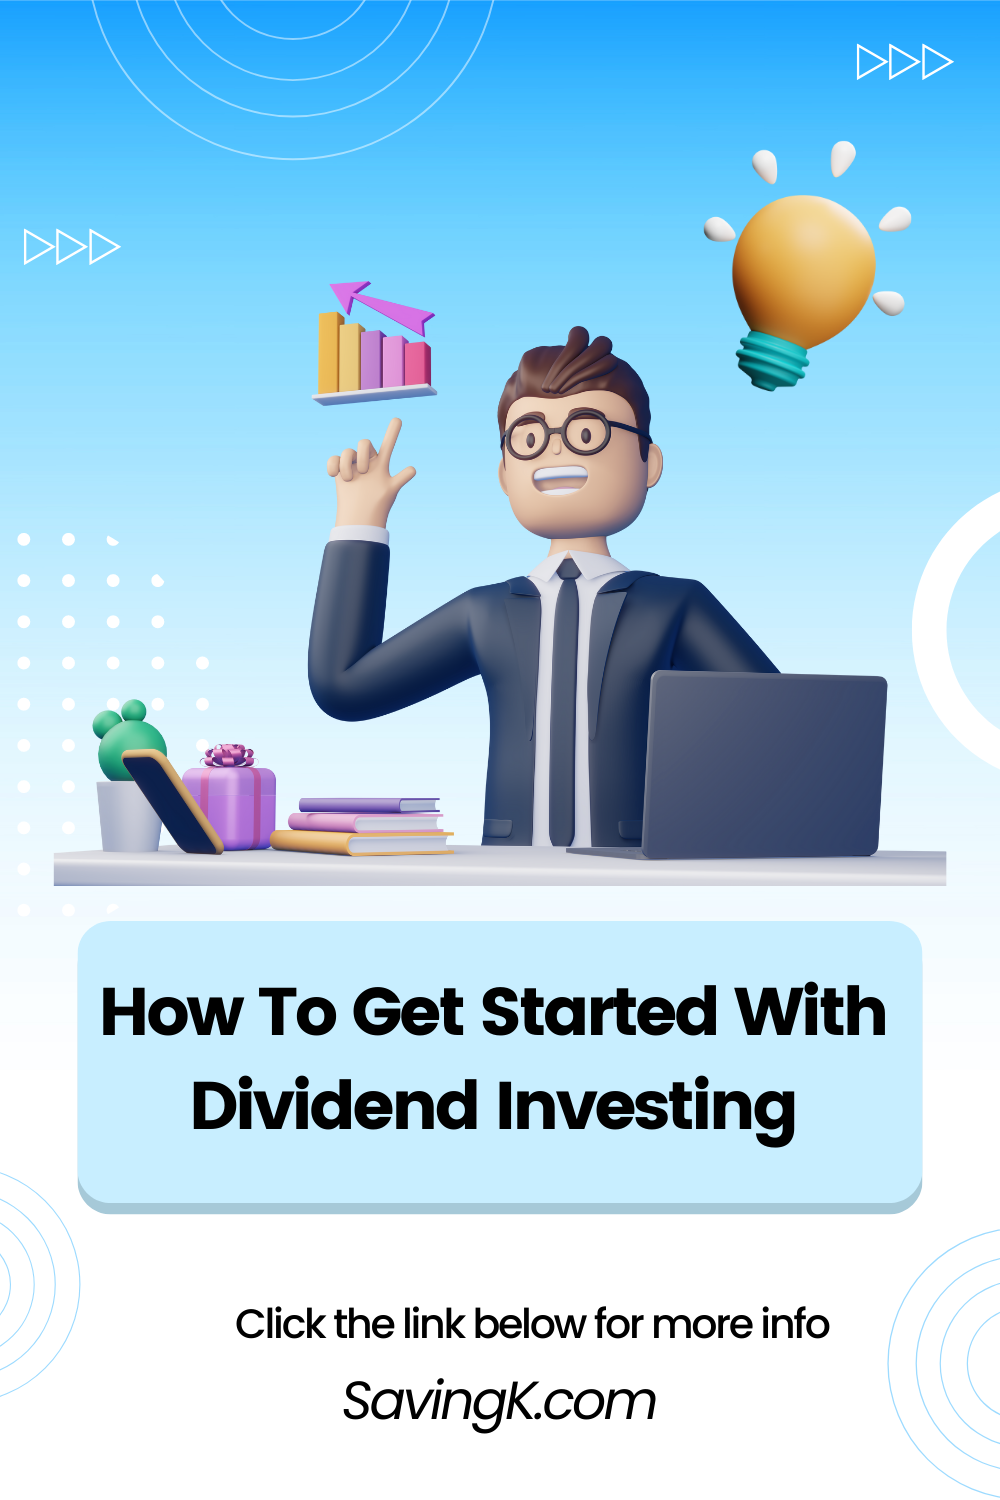 How To Get Started With Dividend Investing